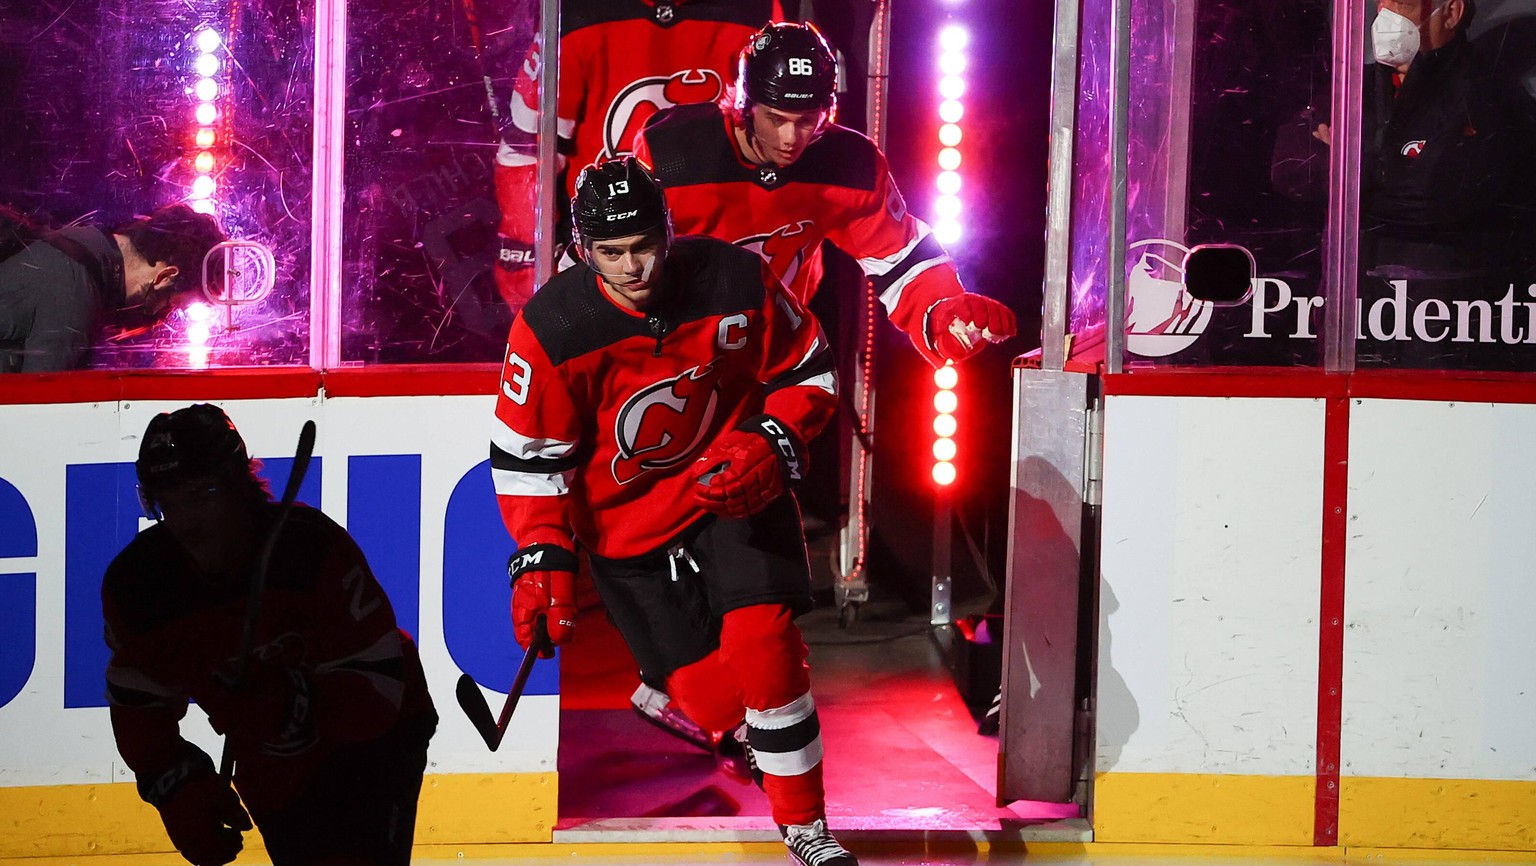 NEWARK, NJ - FEBRUARY 20: New Jersey Devils center Nico Hischier 13 enters the ice prior to the National Hockey League game between the New Jersey Devils and the Buffalo Sabres on February 20, 2021 at ...